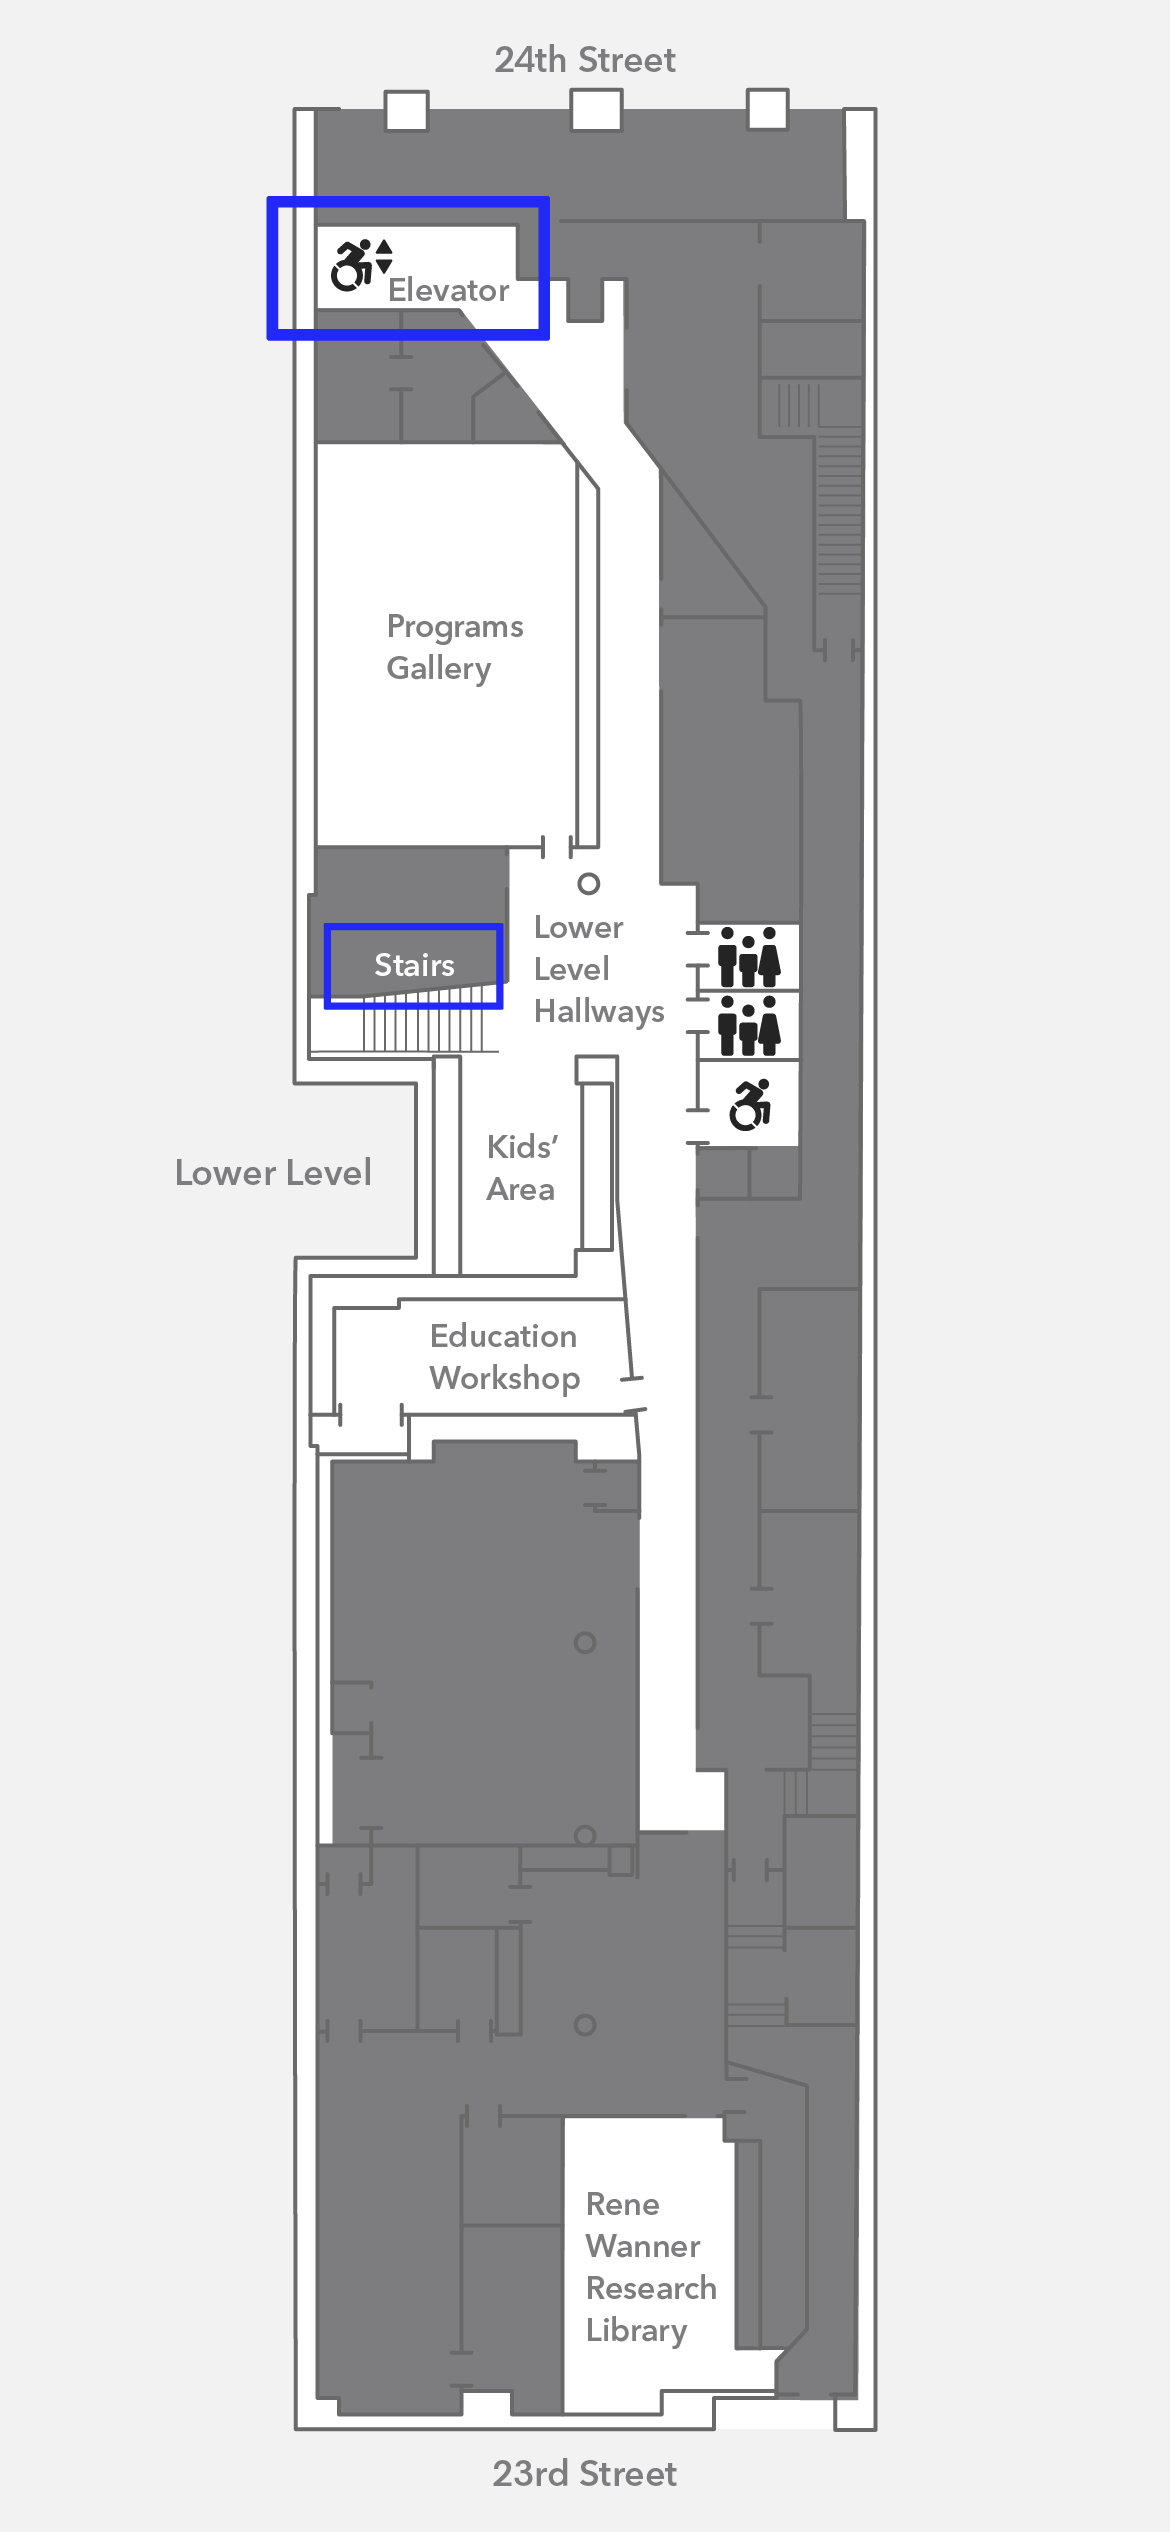 A map of the lower level of Poster House, shaped like a long hallway.